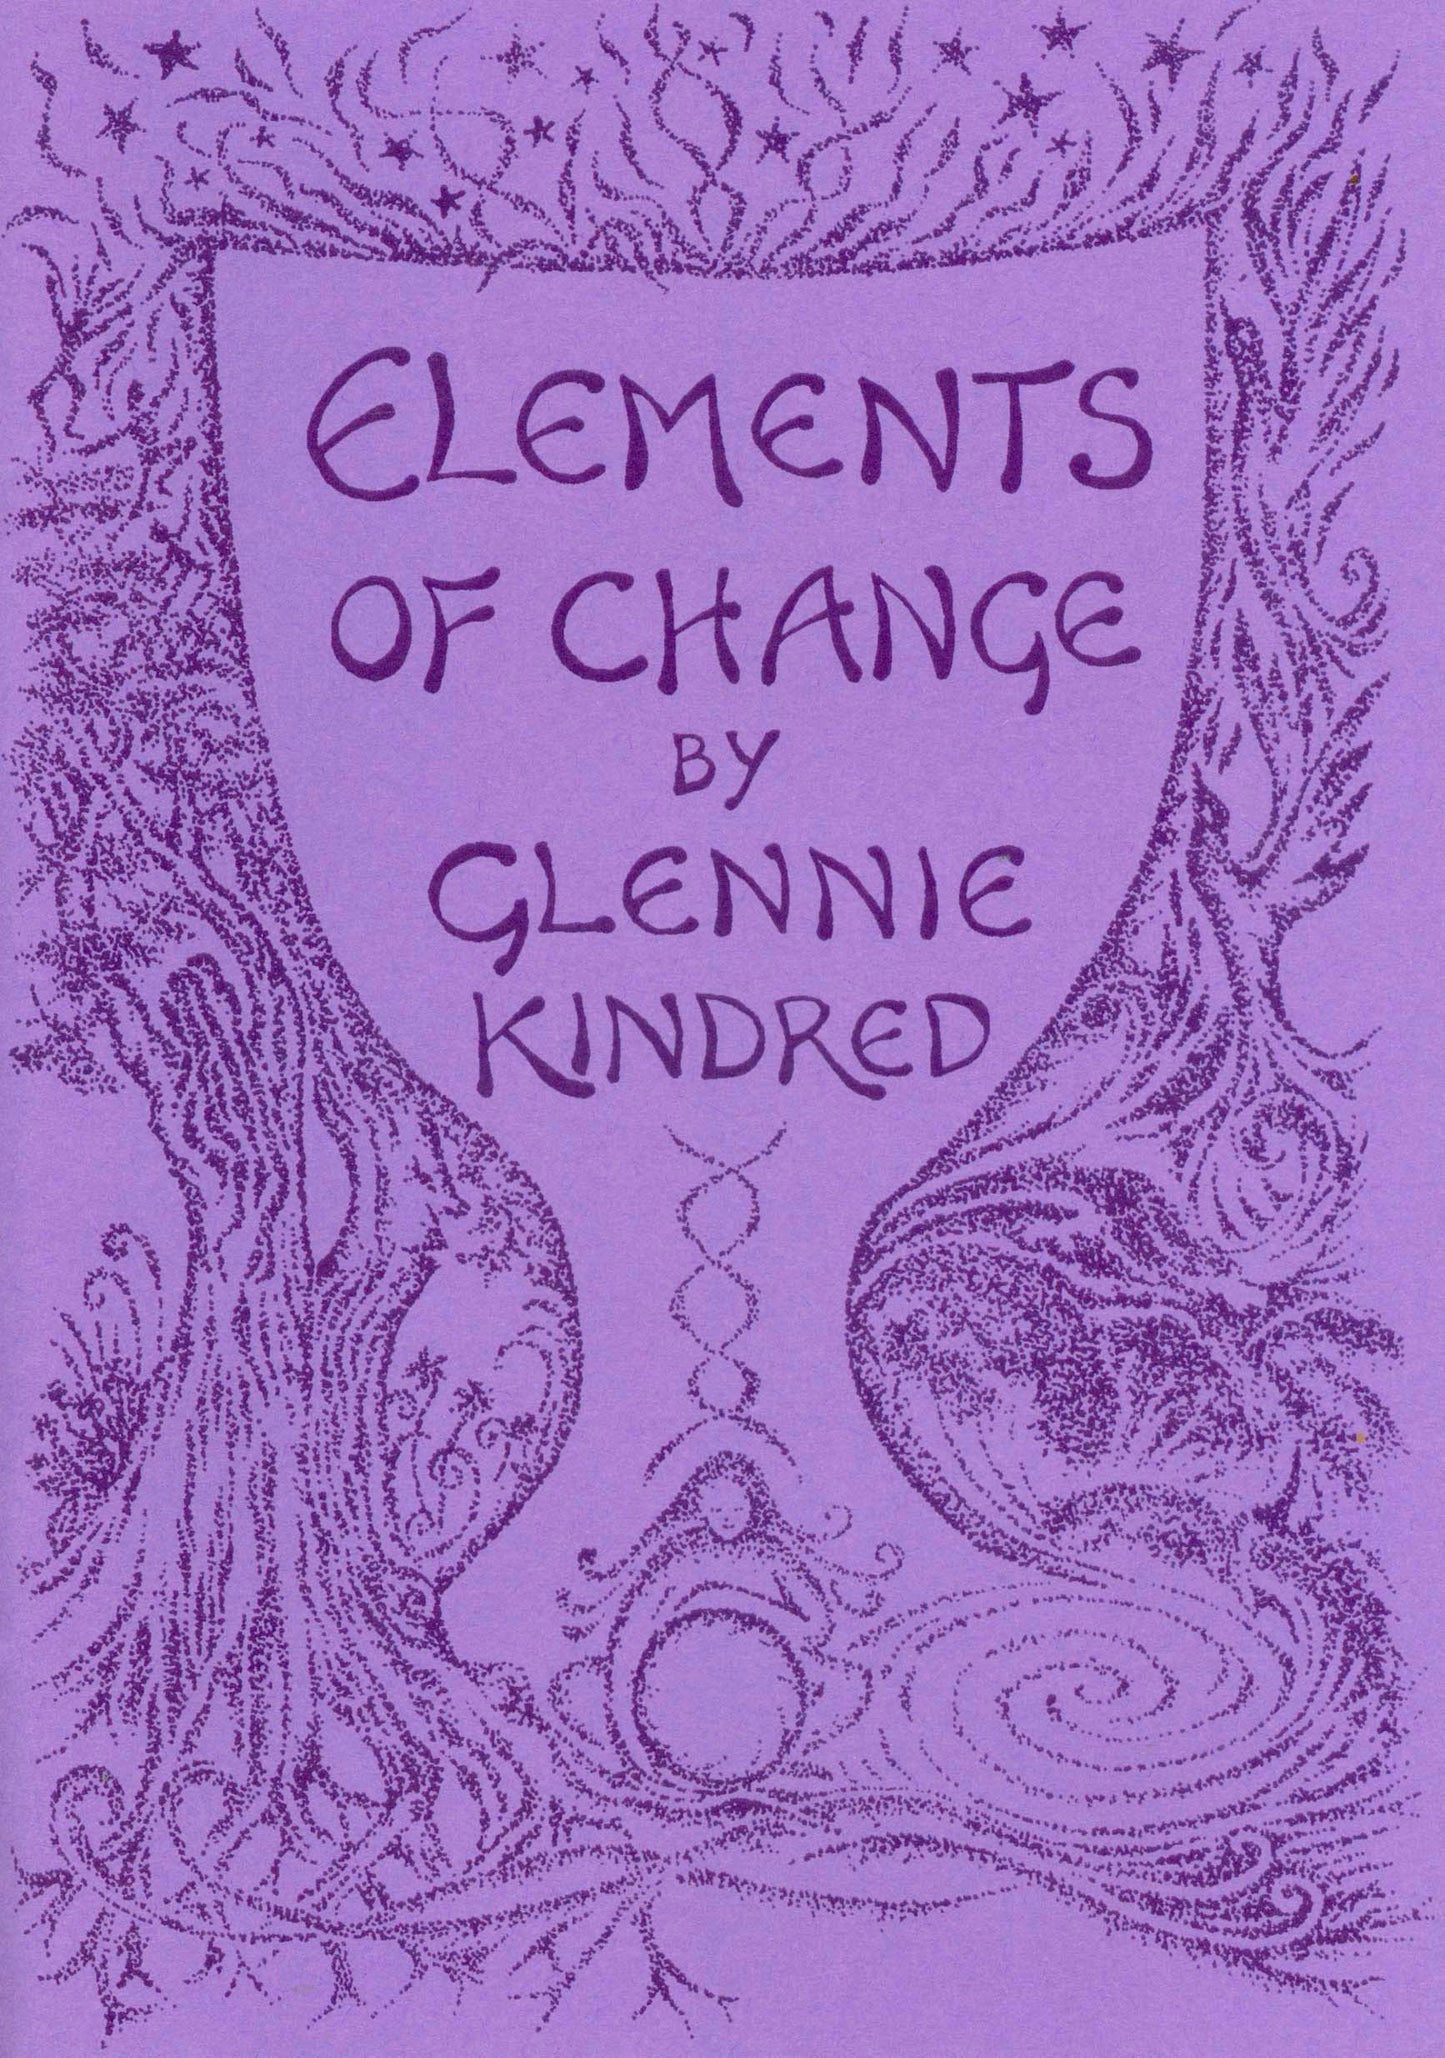 Elements of Change by Glennie Kindred